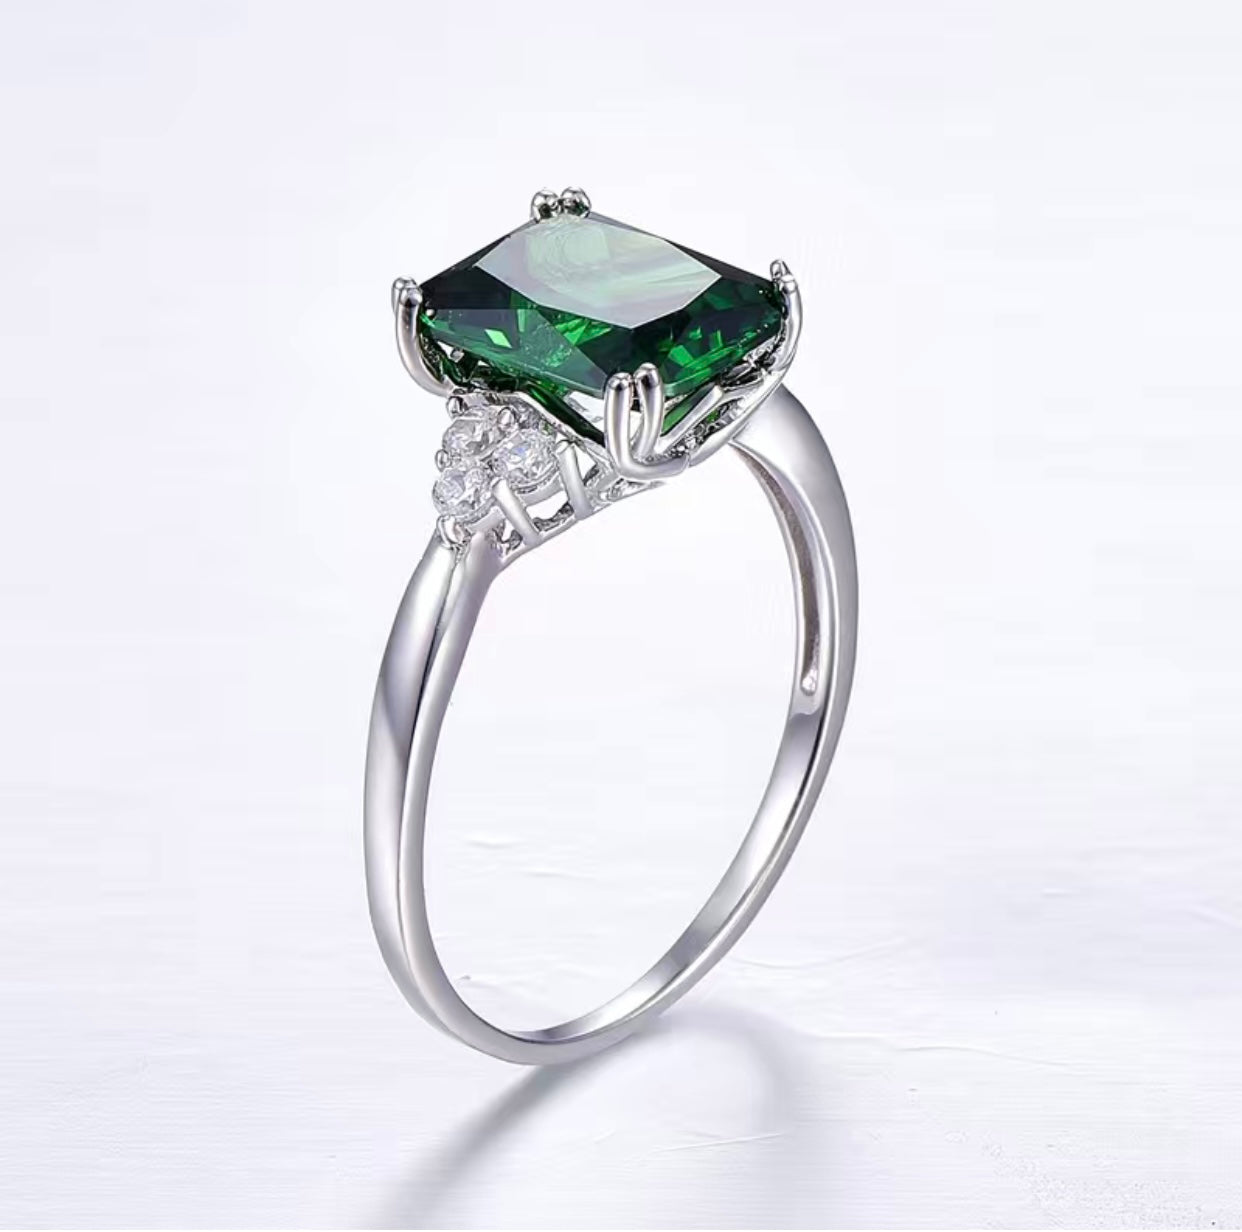 Emerald Ring With Cubic Zirconias Sterling Silver